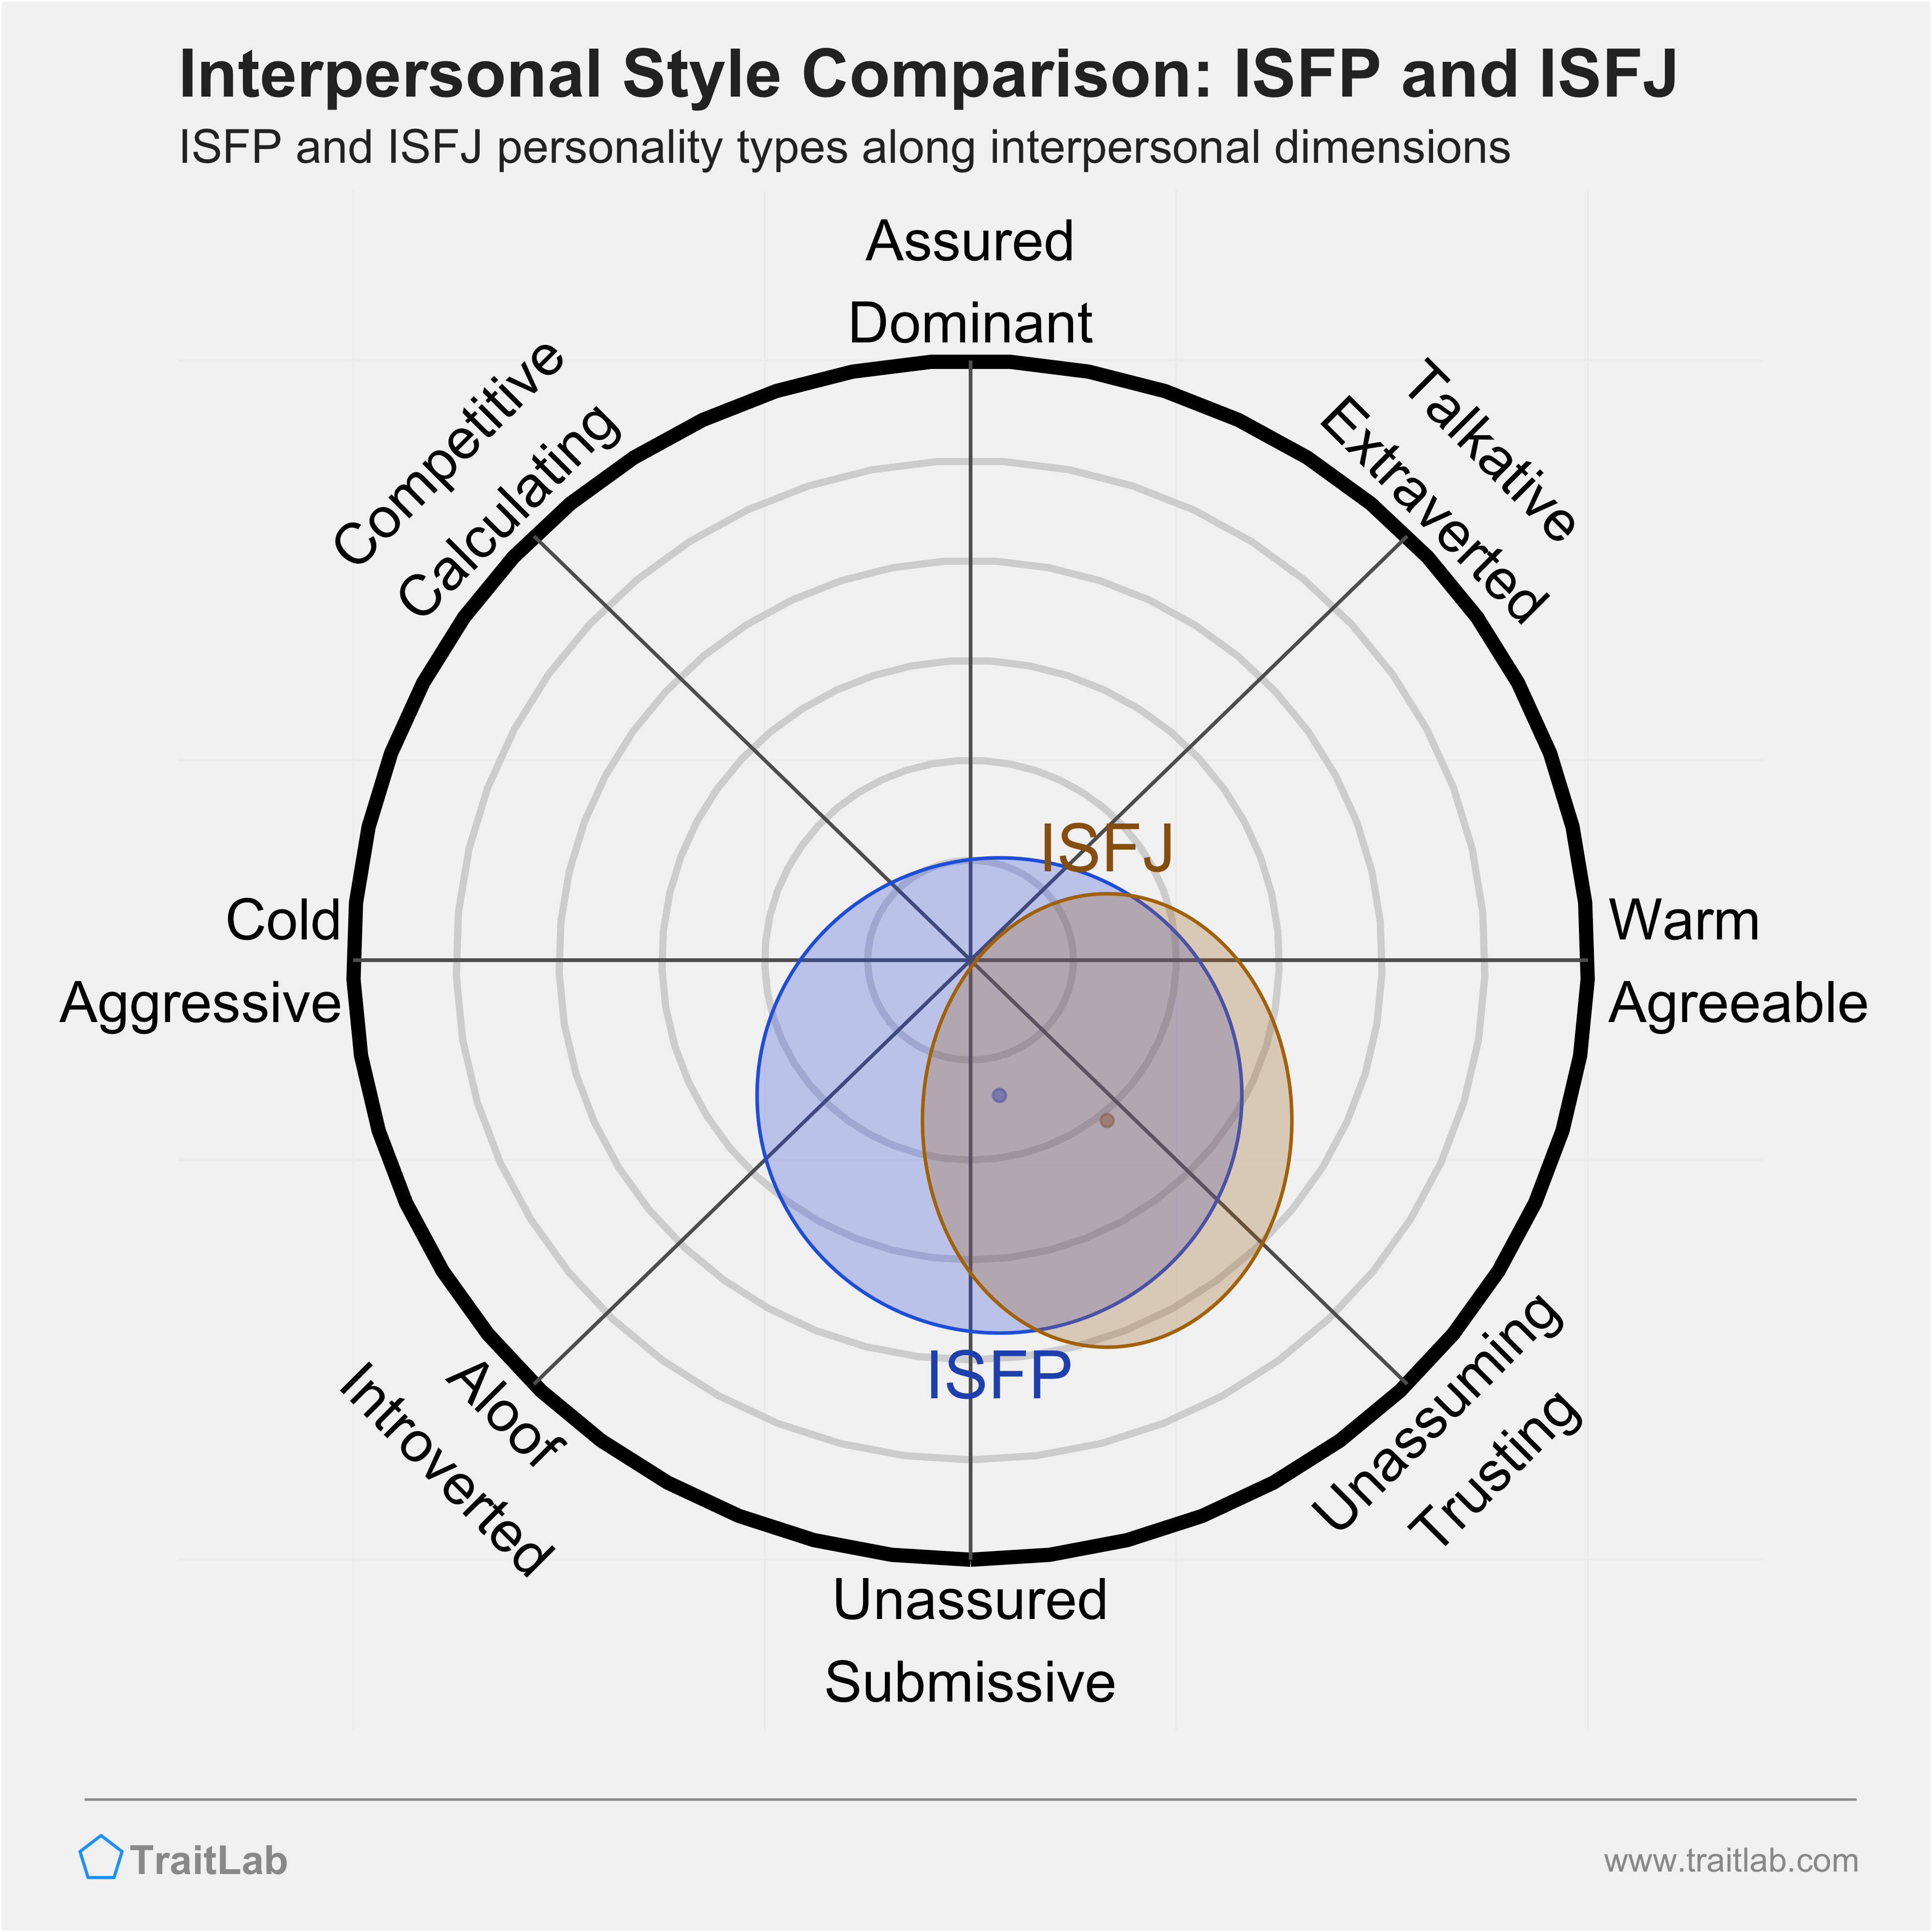 ISFP and ISFJ comparison across interpersonal dimensions